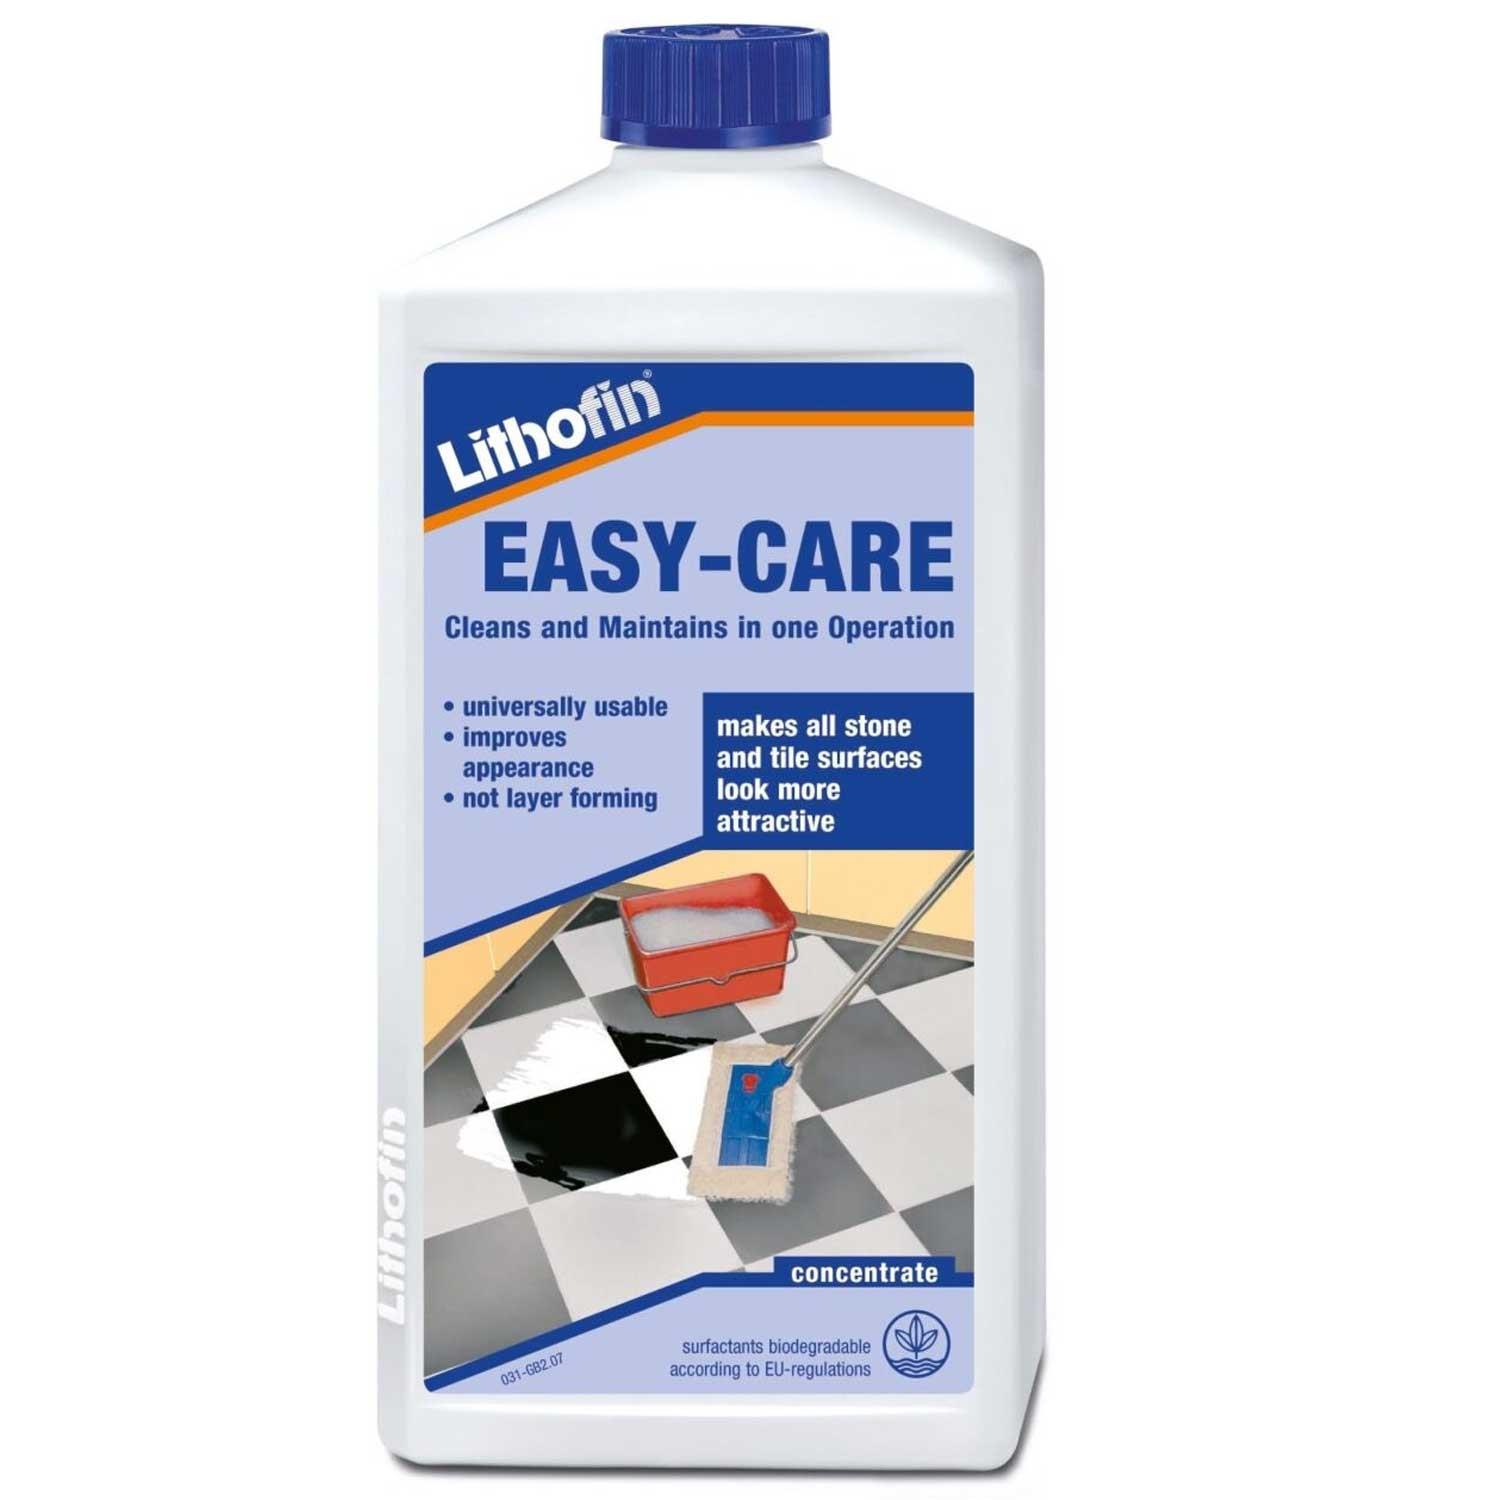 Lithofin Easy Care 1Ltr Clean Maintains All Stones